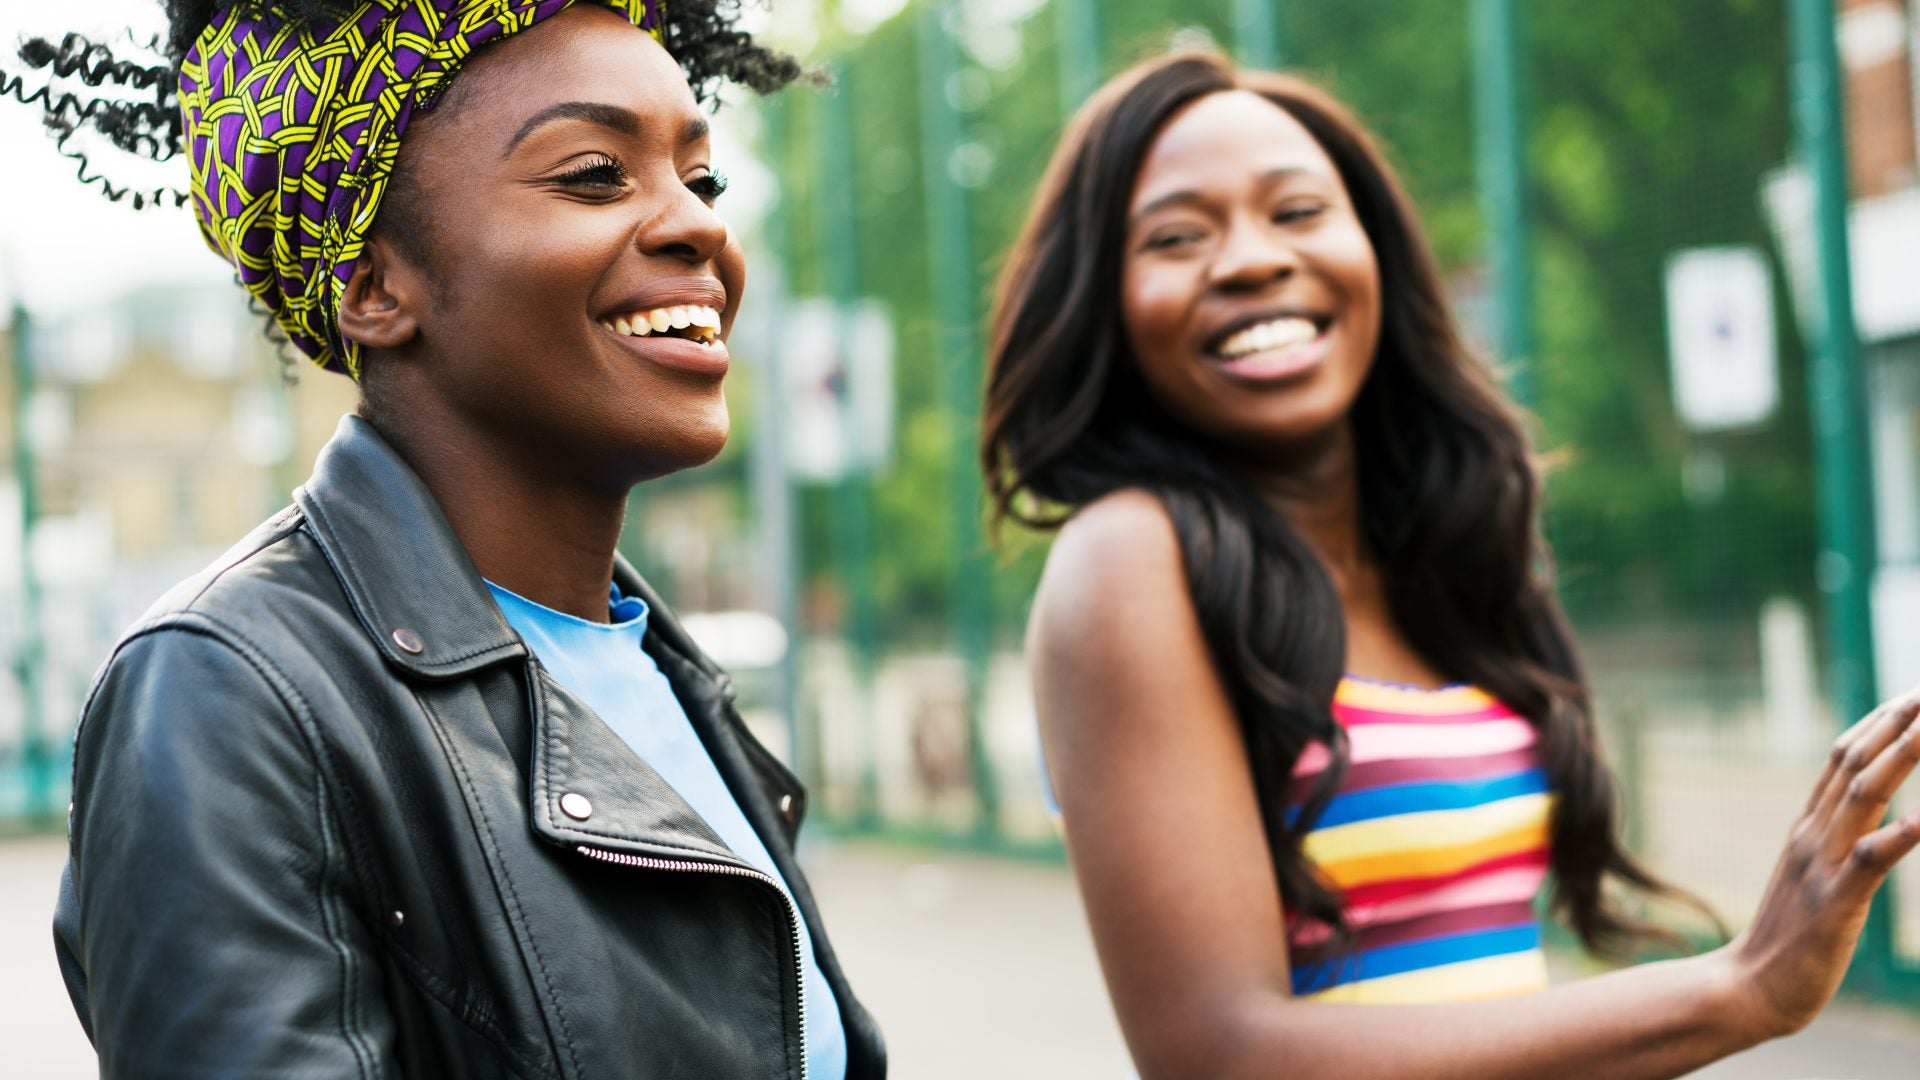 Here Are 4 Red Flags You Should Look Out For In Your Friendships